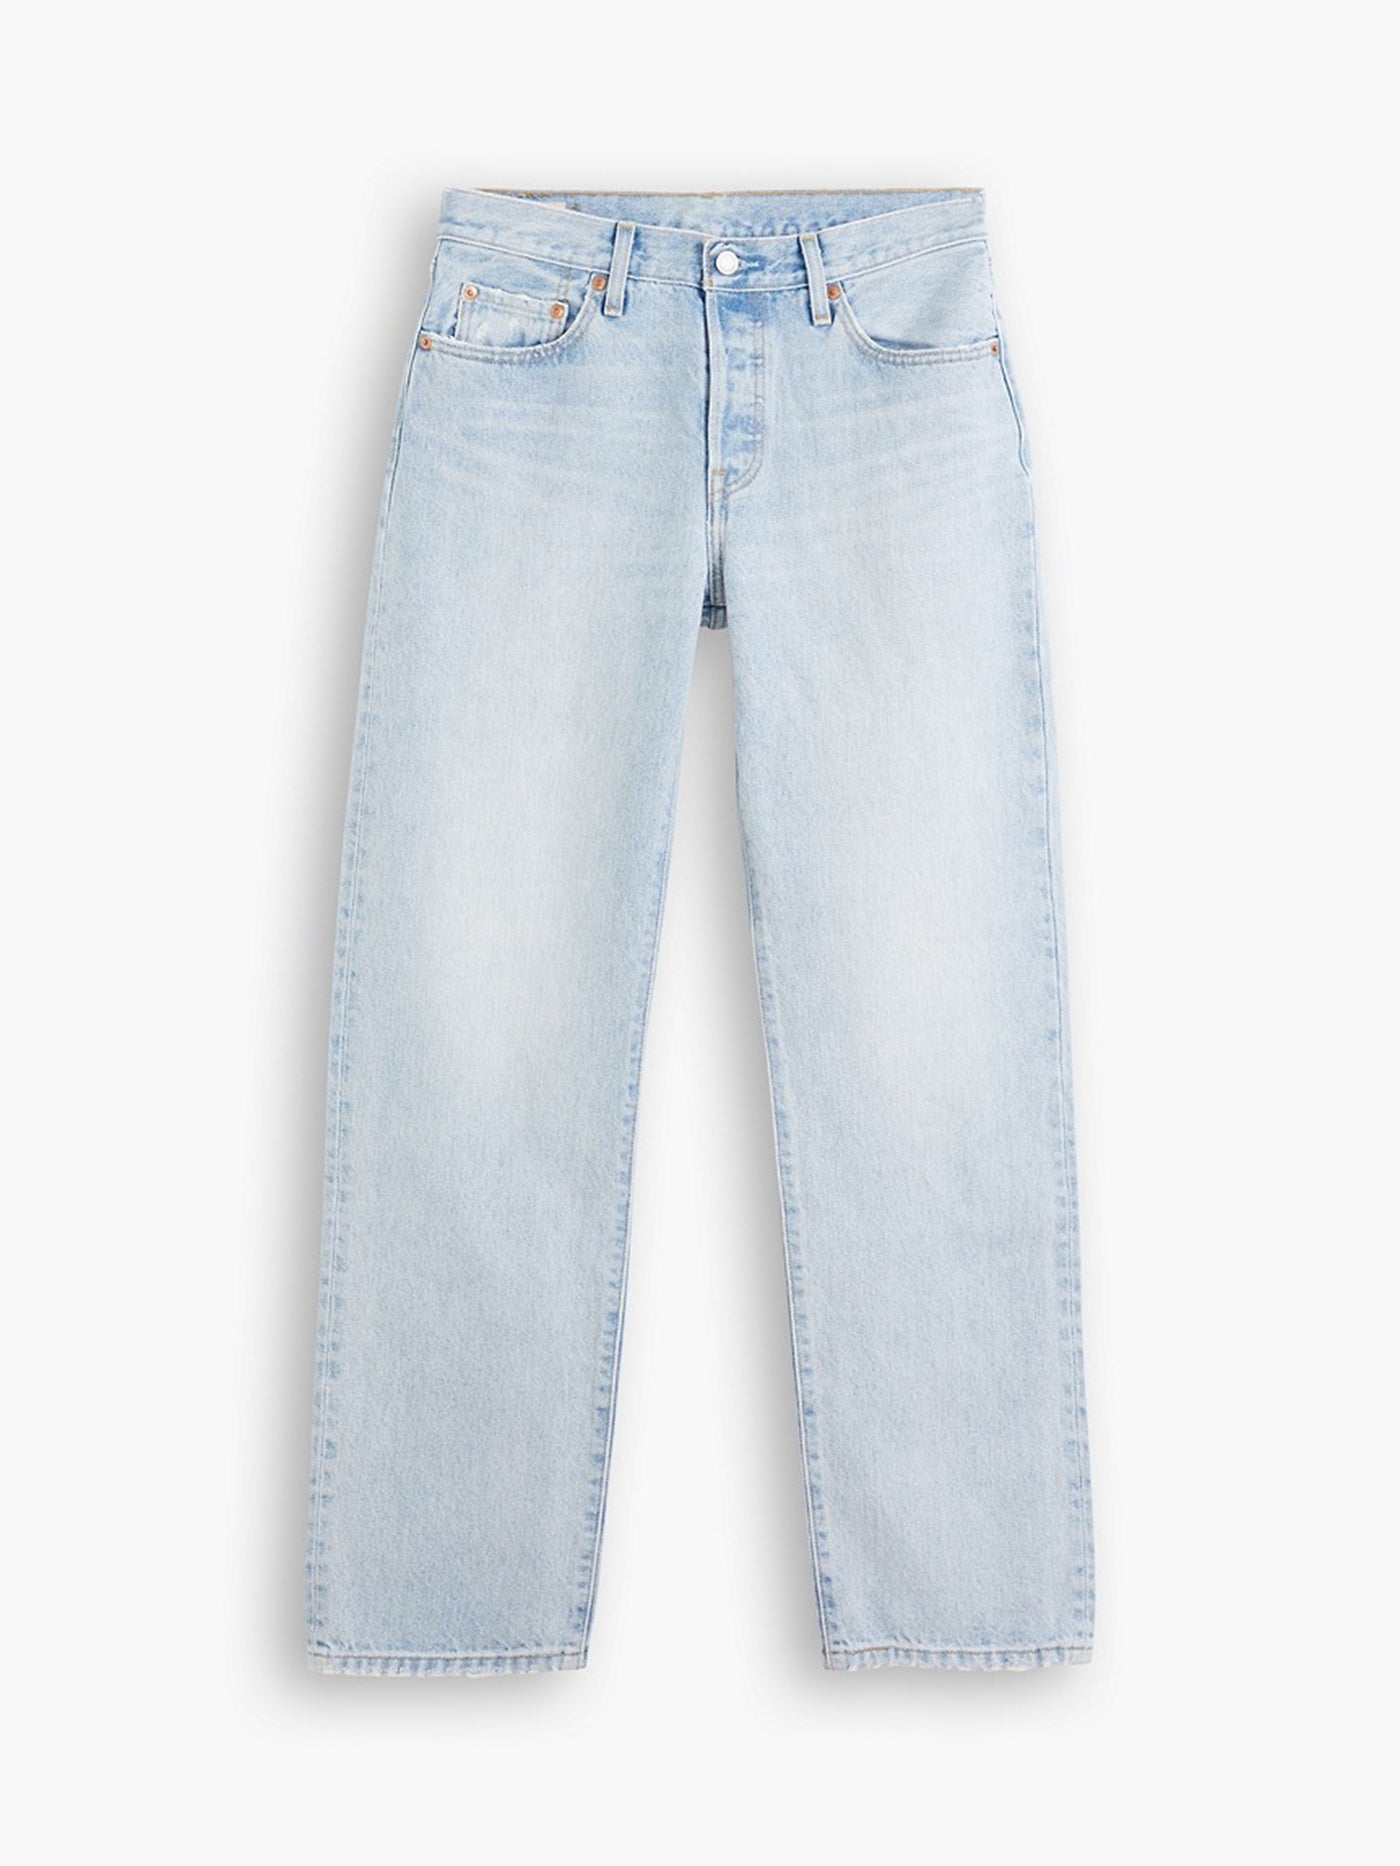 Levi's 501 90's Ever Afternoon Jeans | EMPIRE